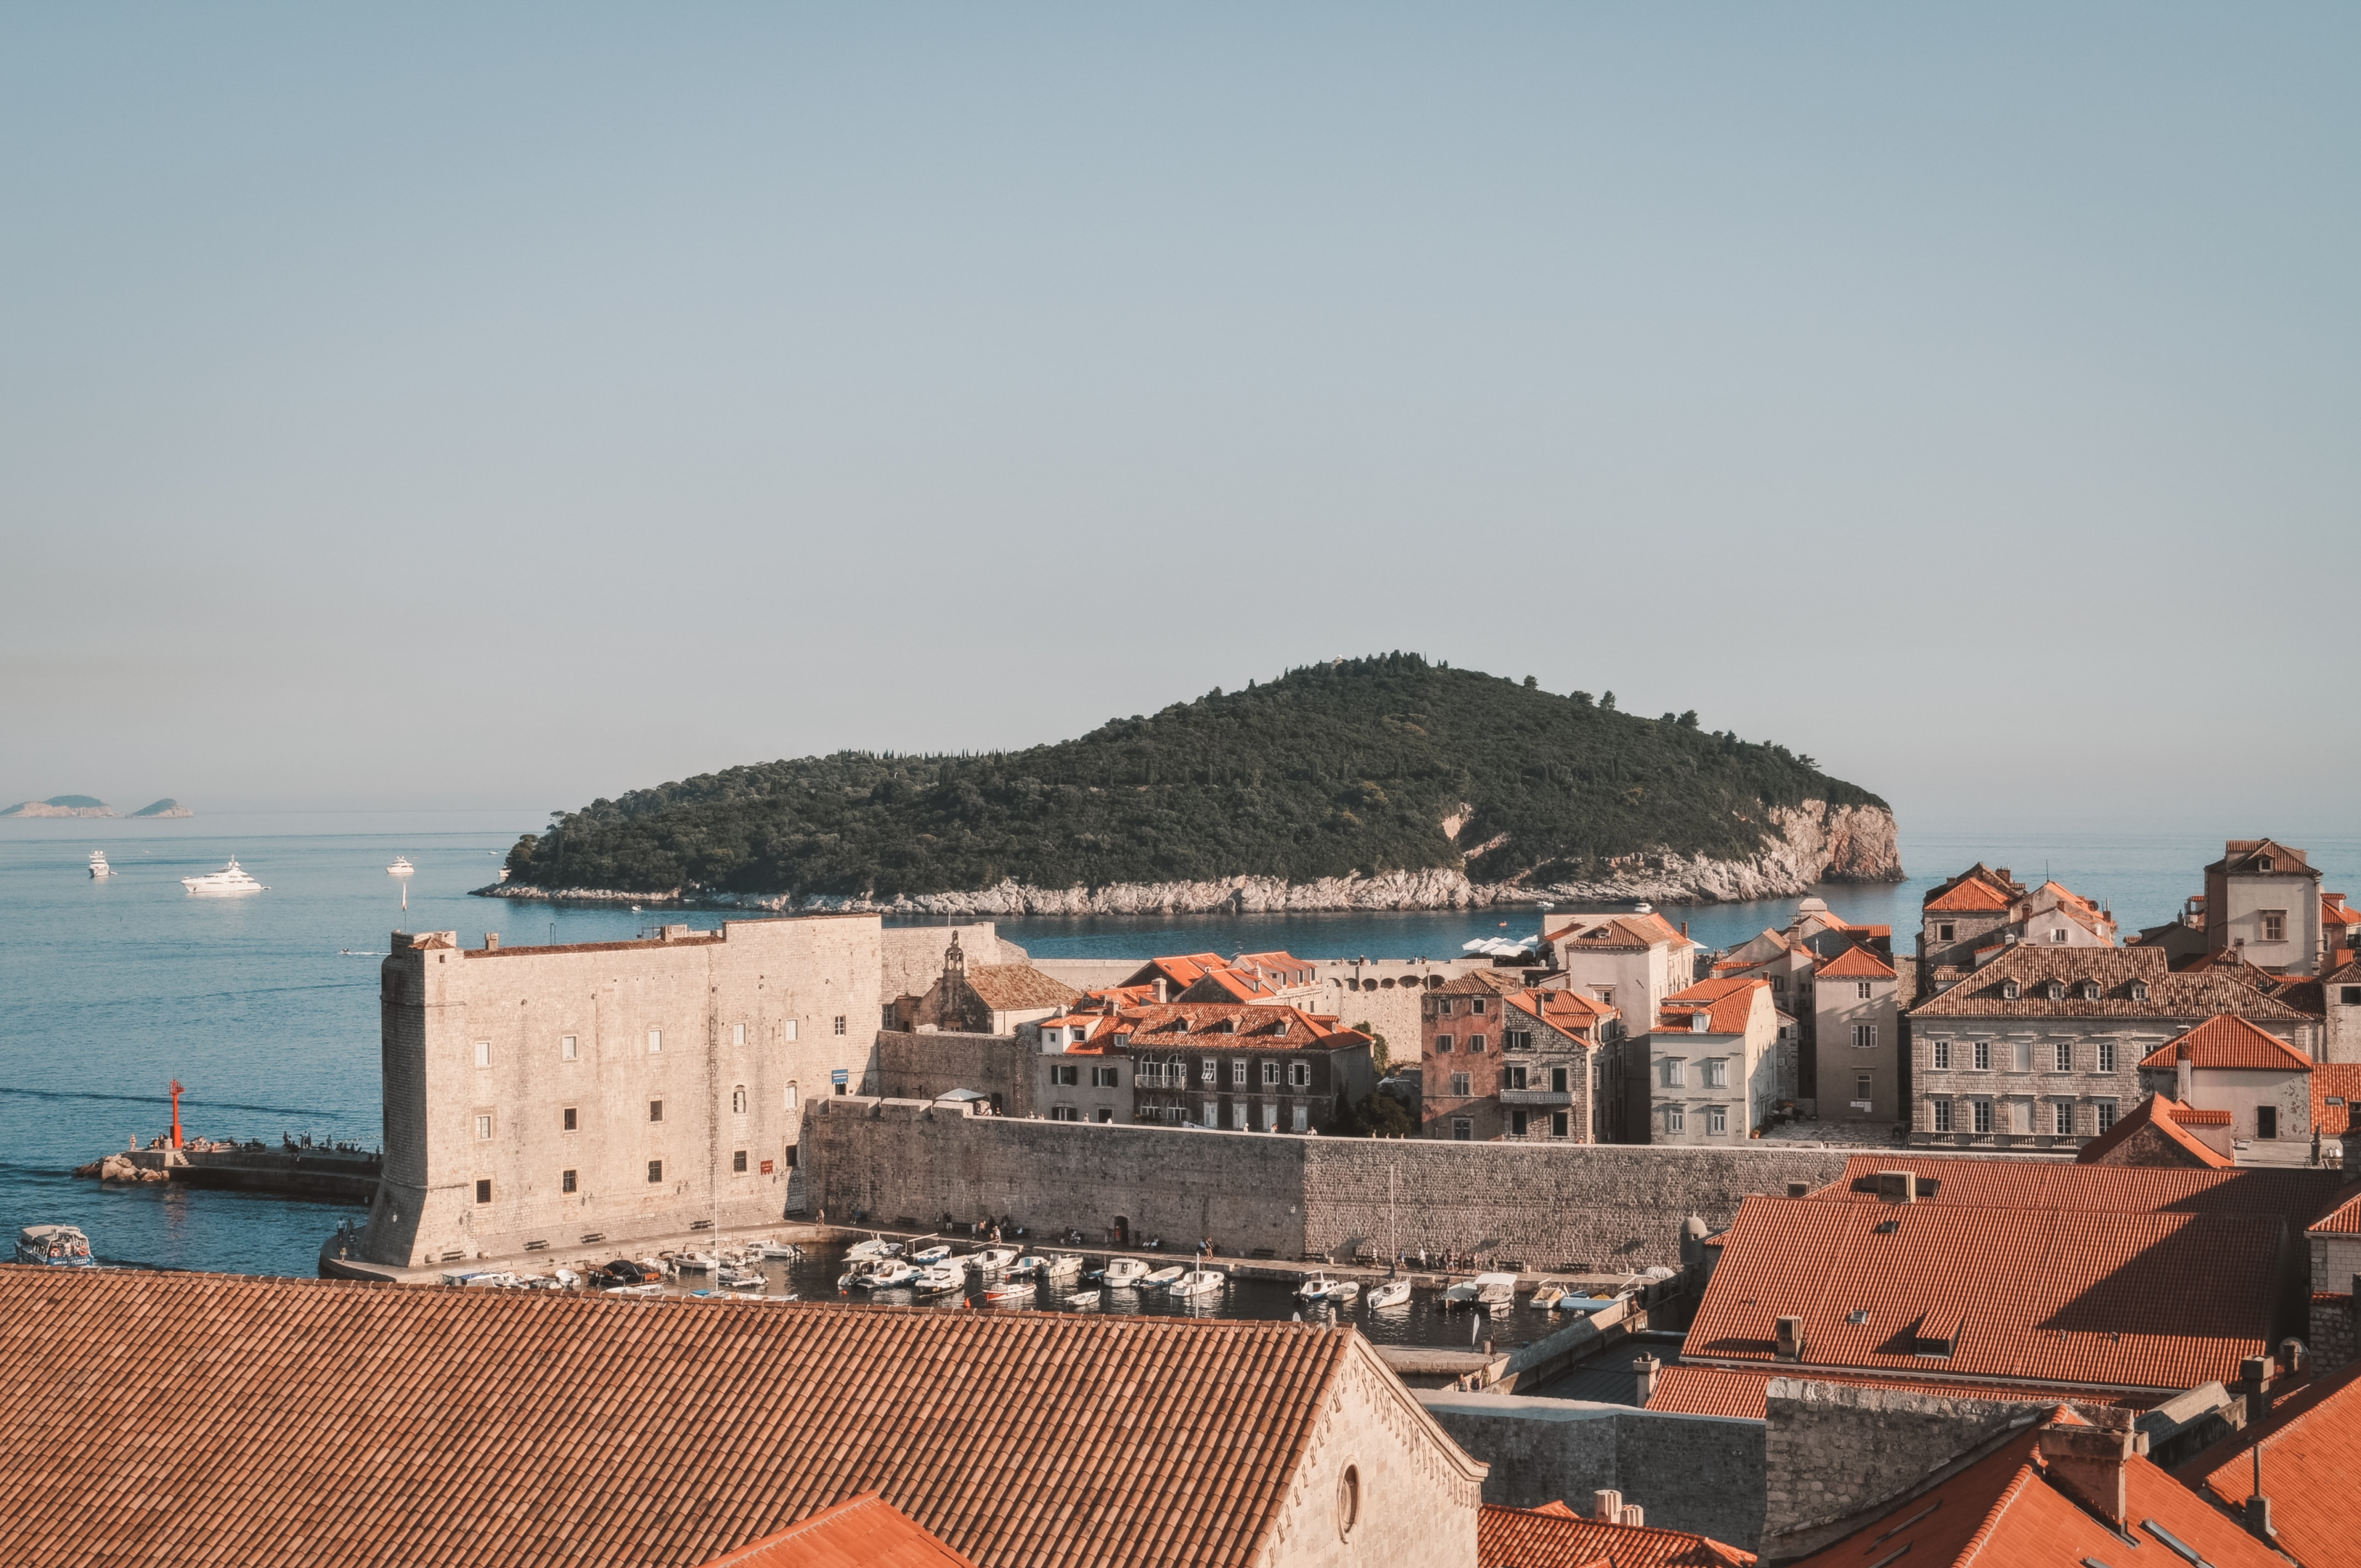 Game of Thrones Filming Location: Old Town Dubrovnik